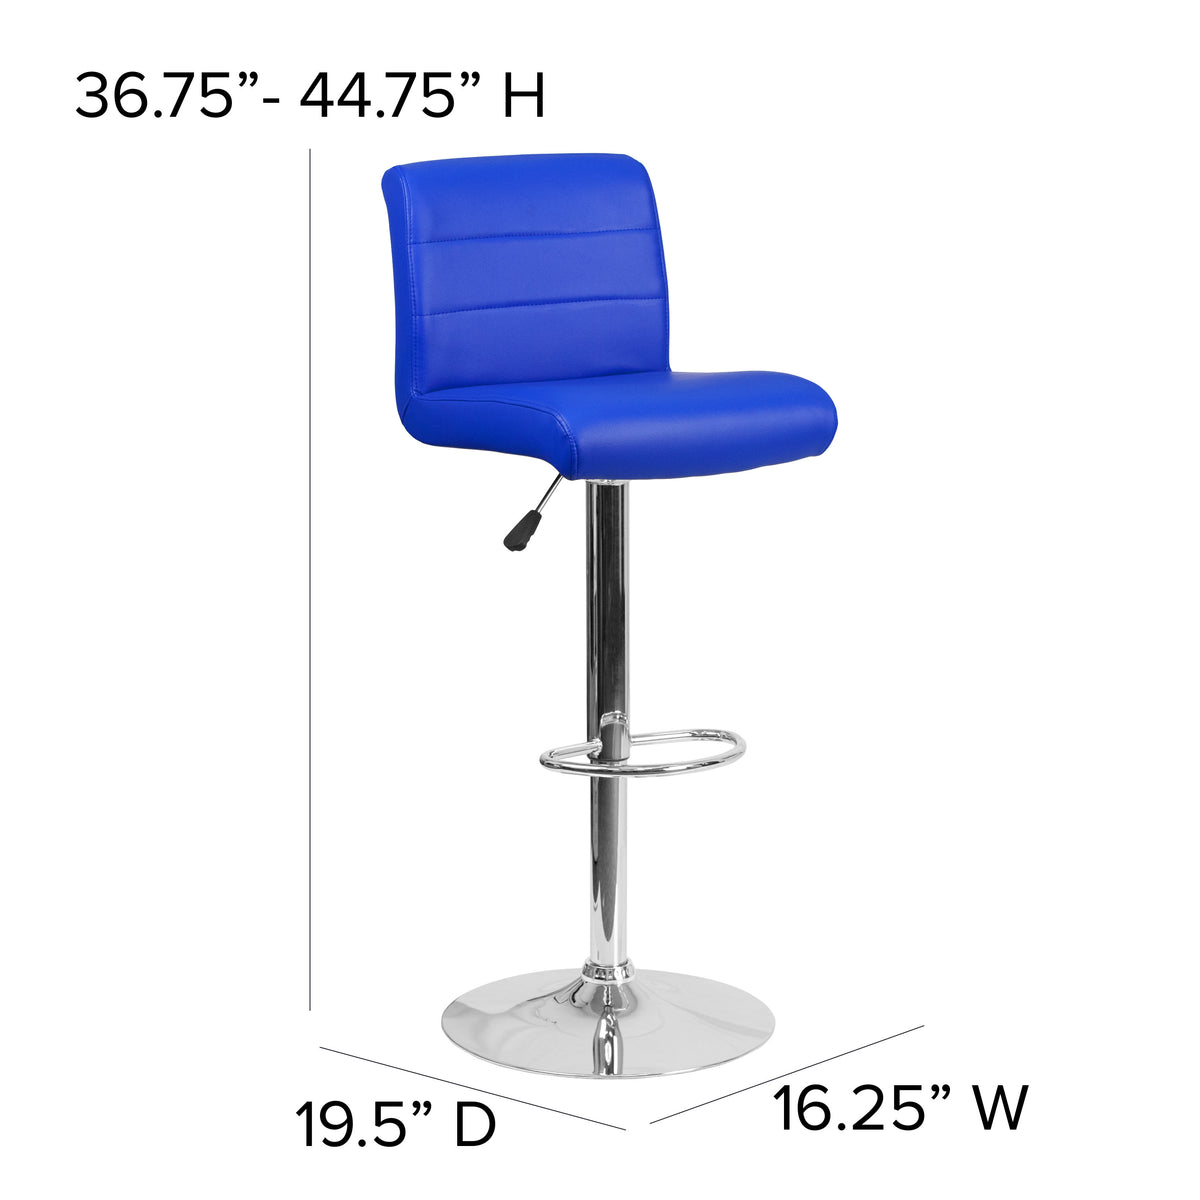 Blue |#| Blue Vinyl Adjustable Height Barstool with Rolled Seat and Chrome Base